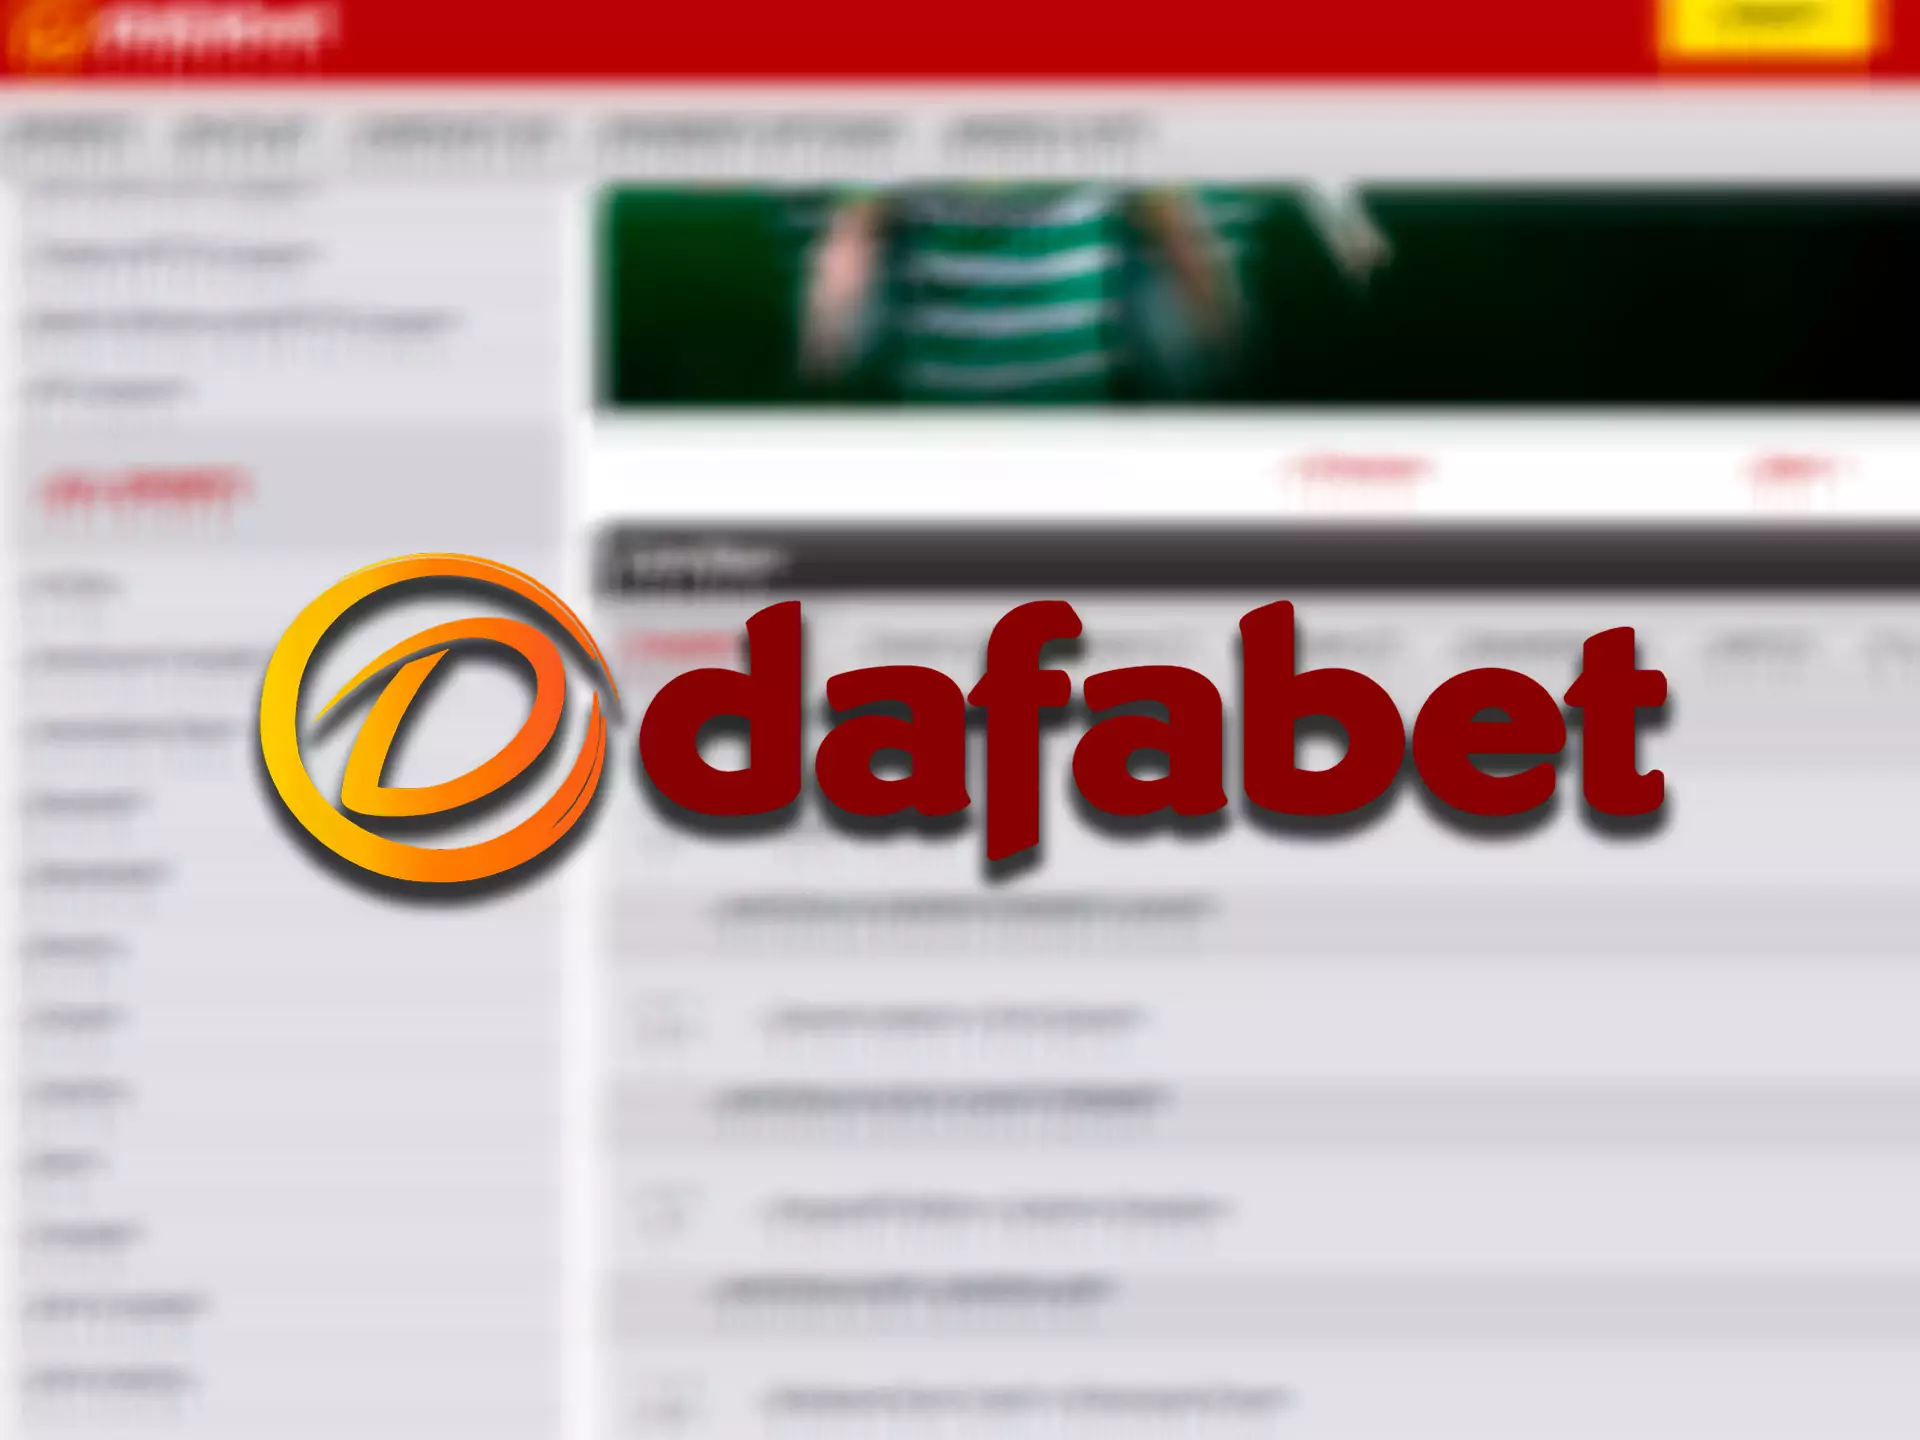 Dafabet has profitable odds on cricket betting.